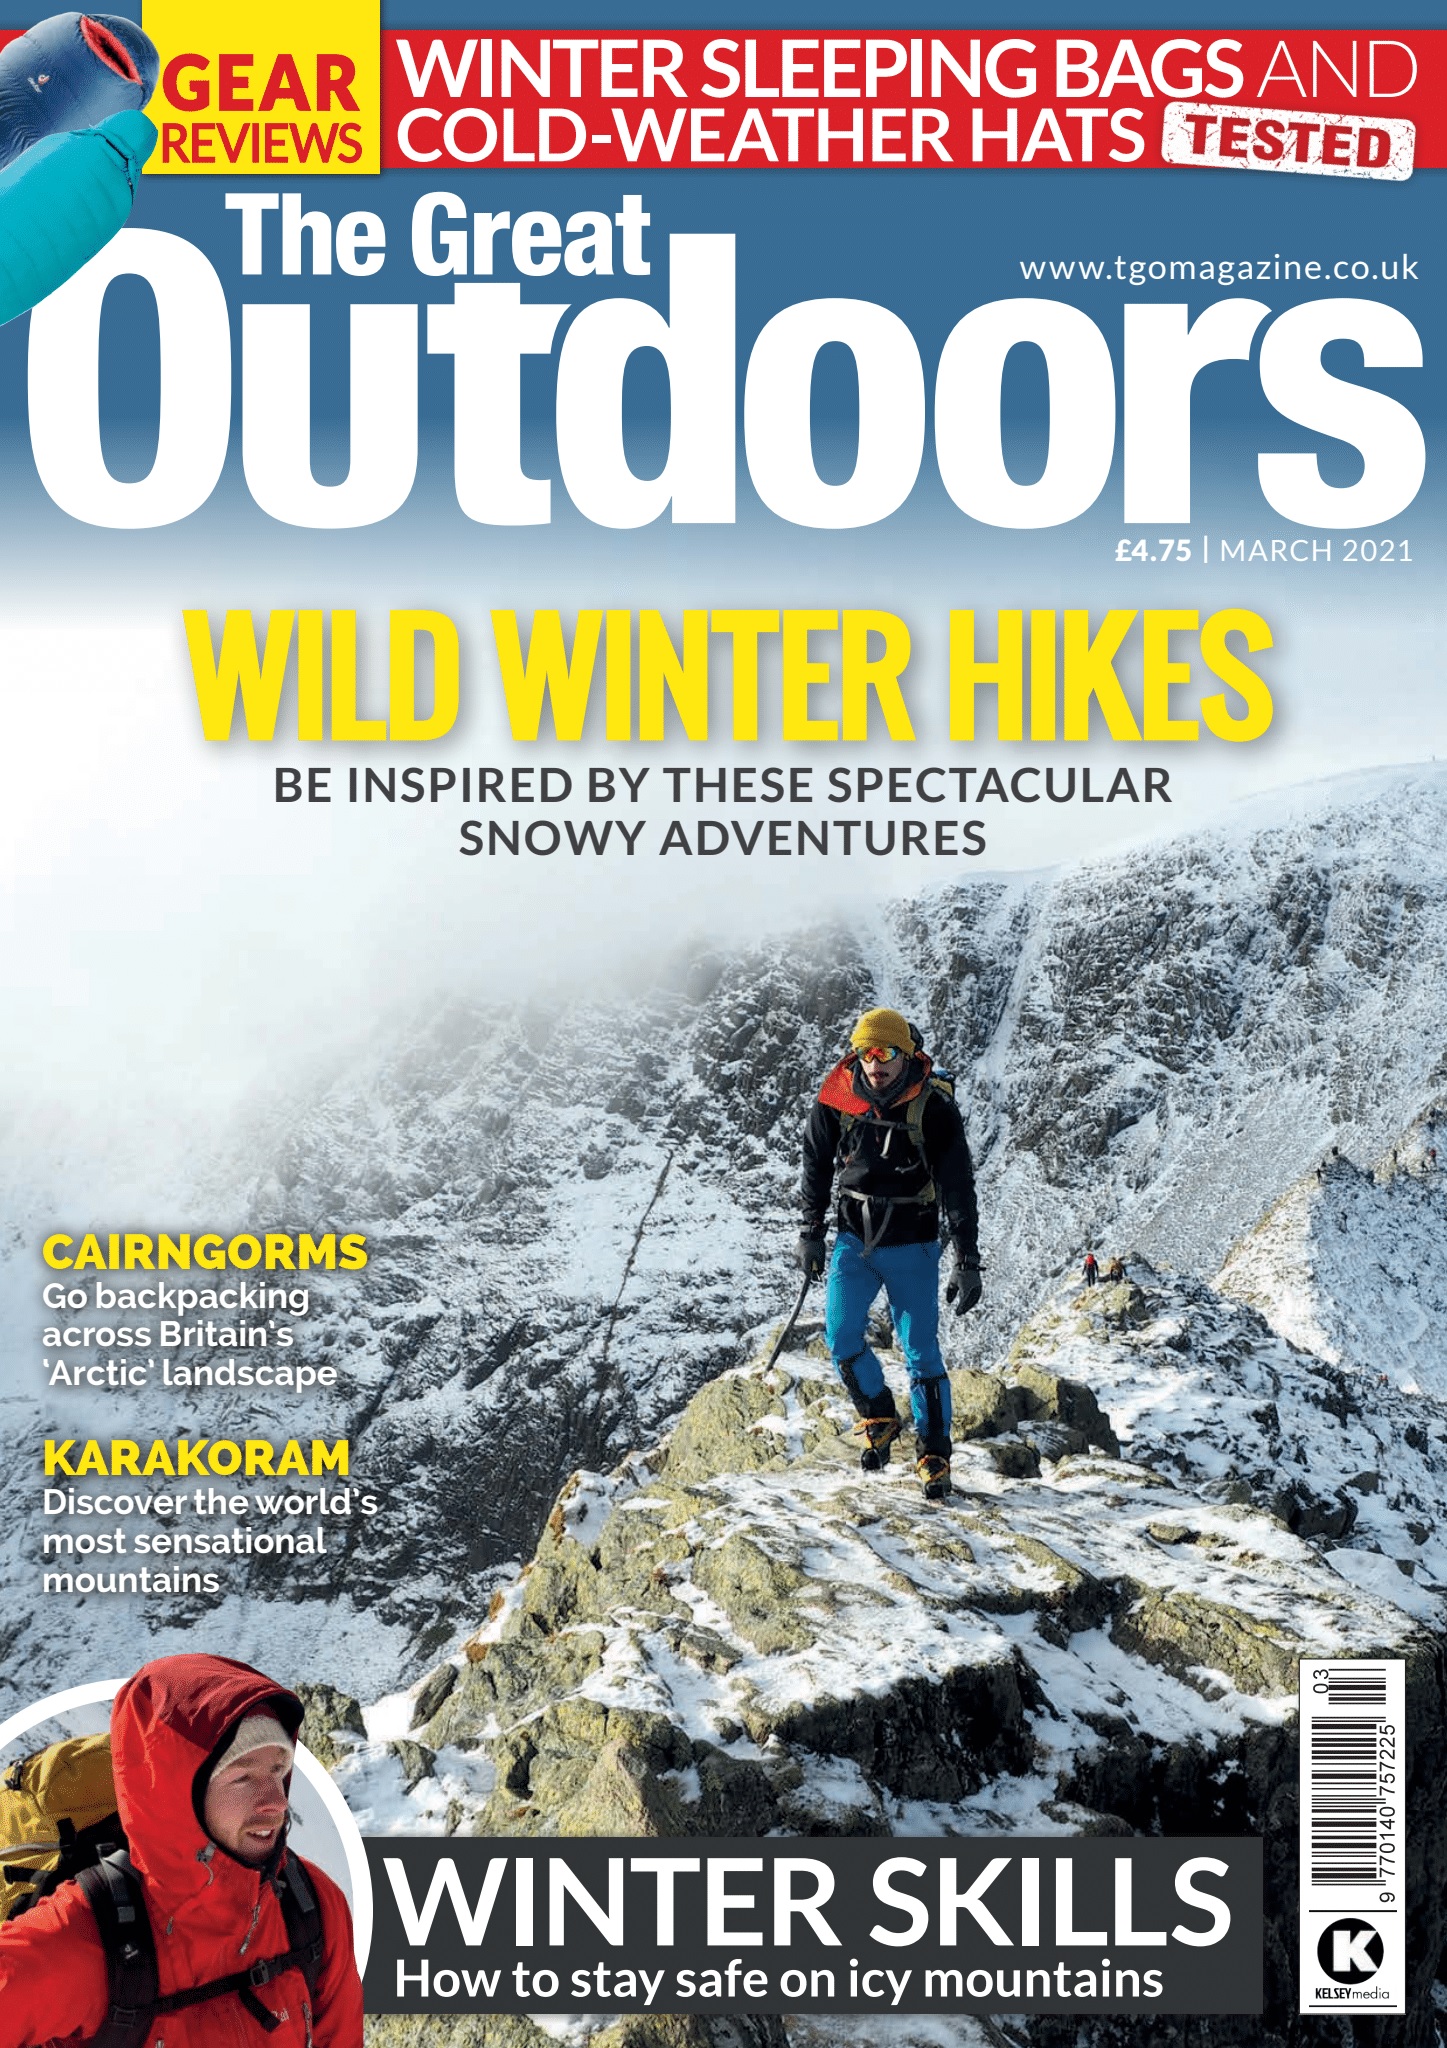 The Great Outdoors March 2021